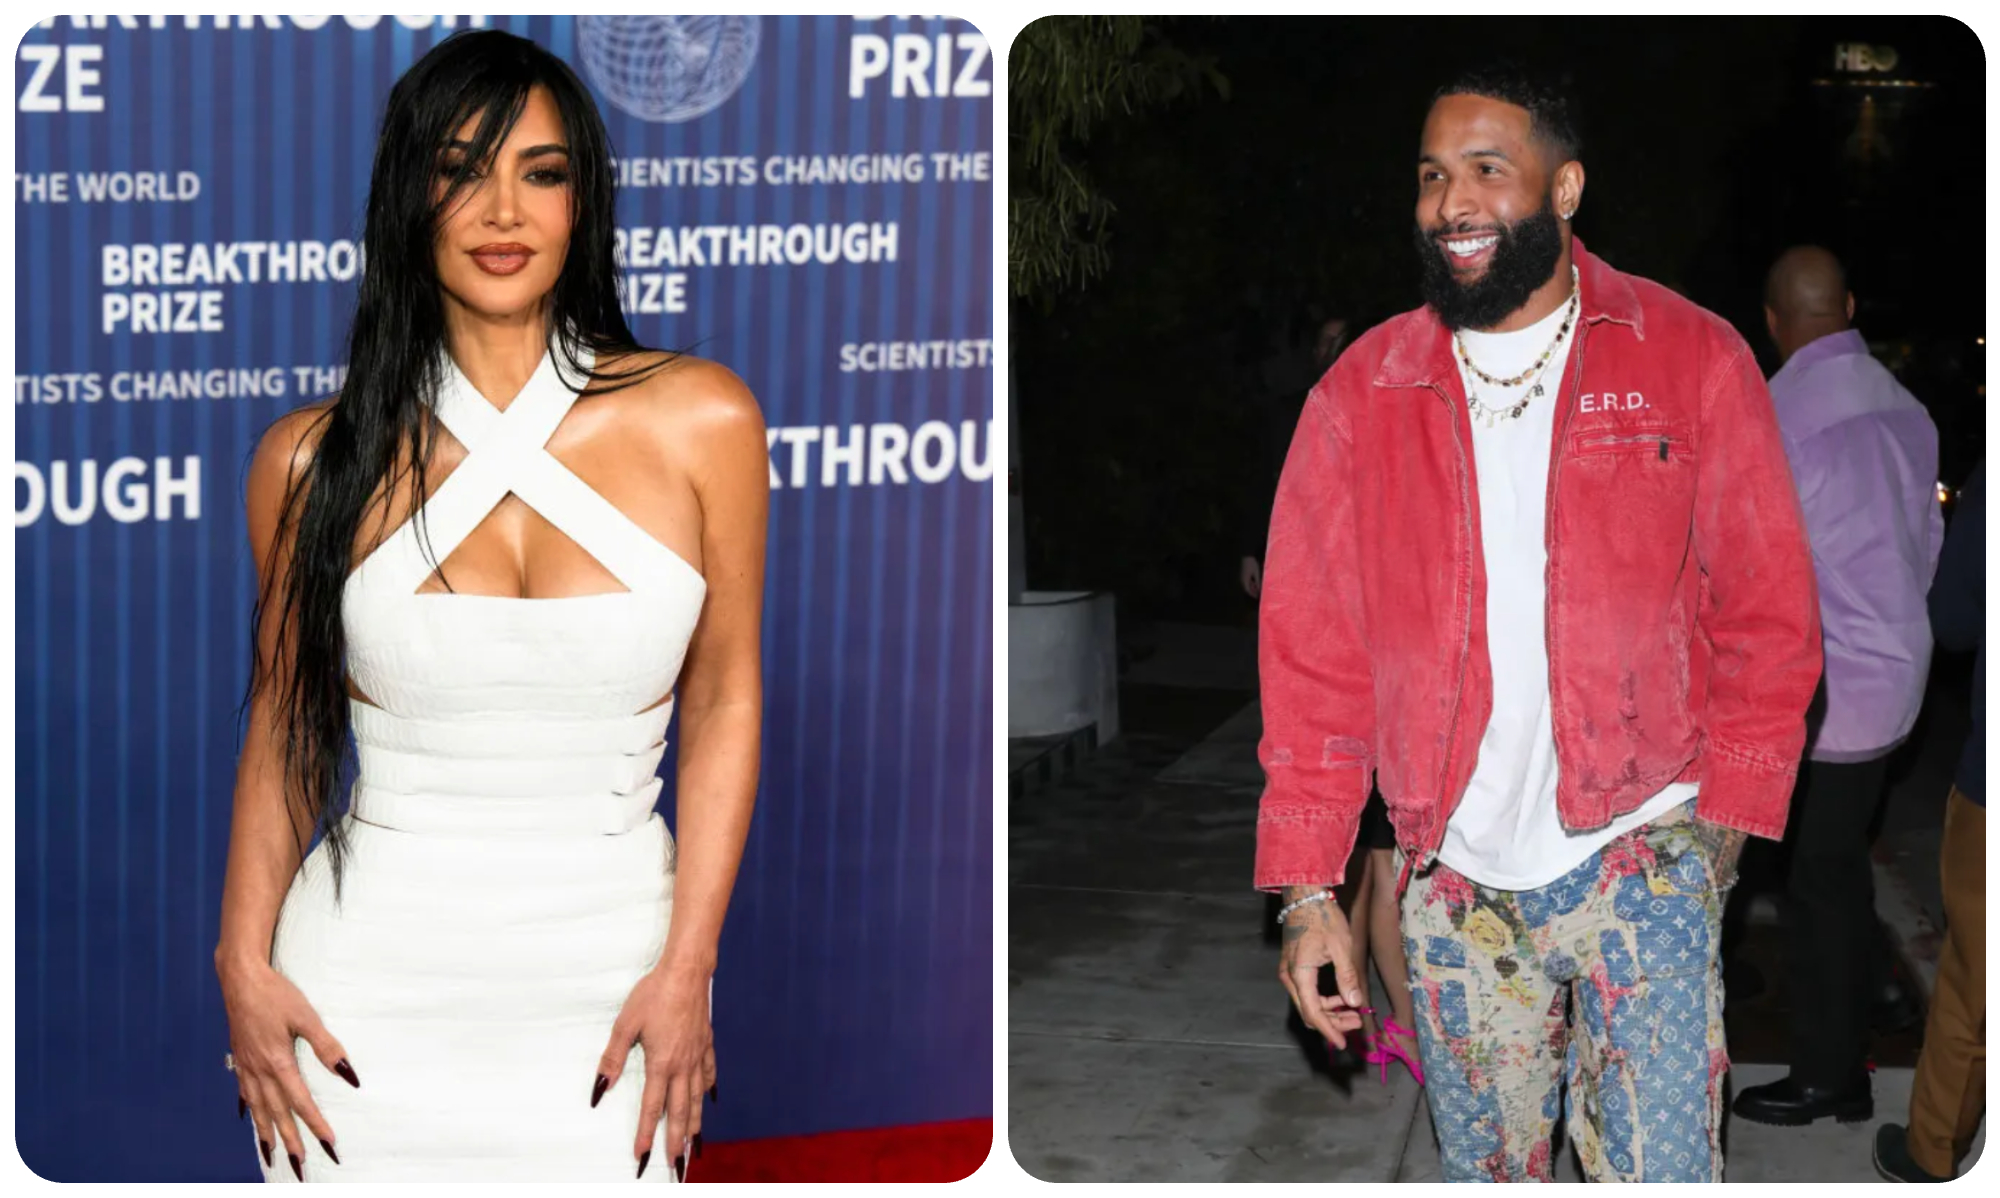 Kuits Kalling Konfirmation: Sources Say Kim Kardashian & Odell Beckham Jr.’s Fling ‘Fizzled Out’ Because Of Their Busy Careers